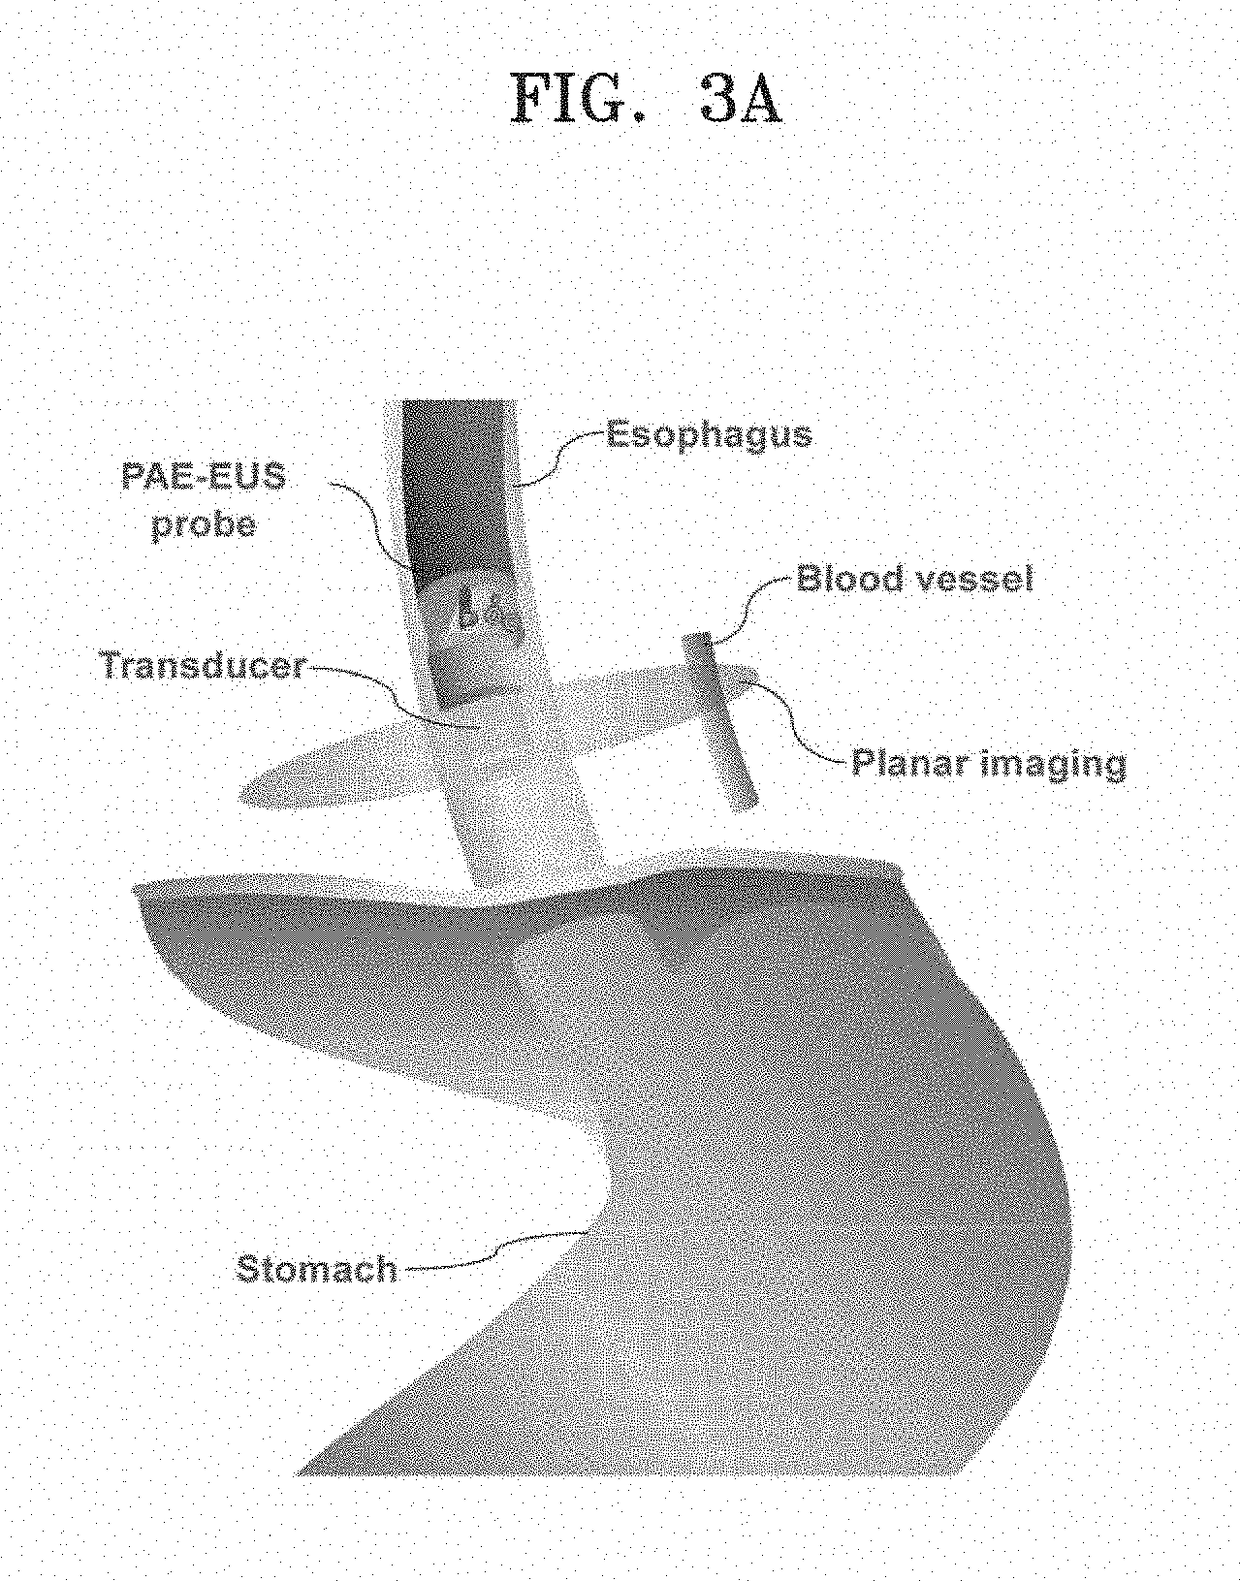 Radial array transducer-based photoacoustic and ultrasonic endoscopy system